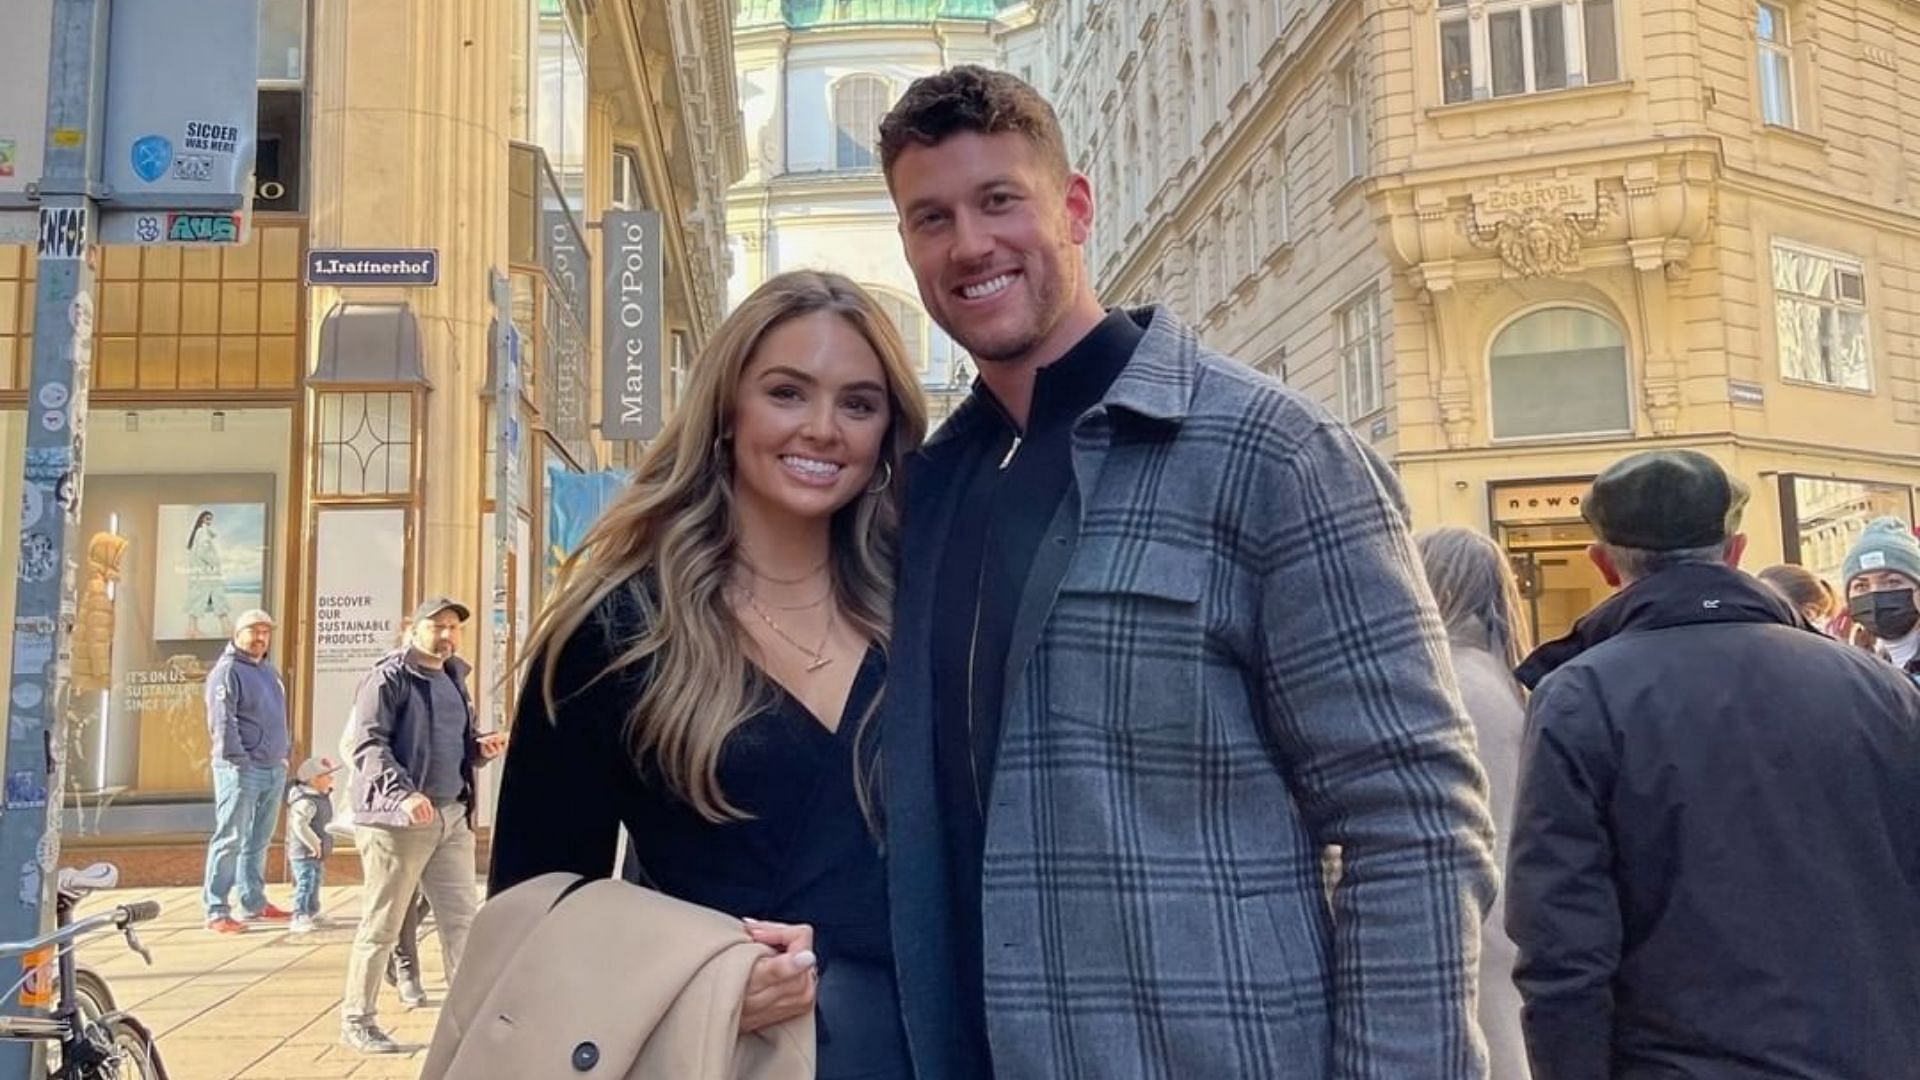 Susie Evans and Clayton Echard from The Bachelor (Image via Instagram/bachelorabc)